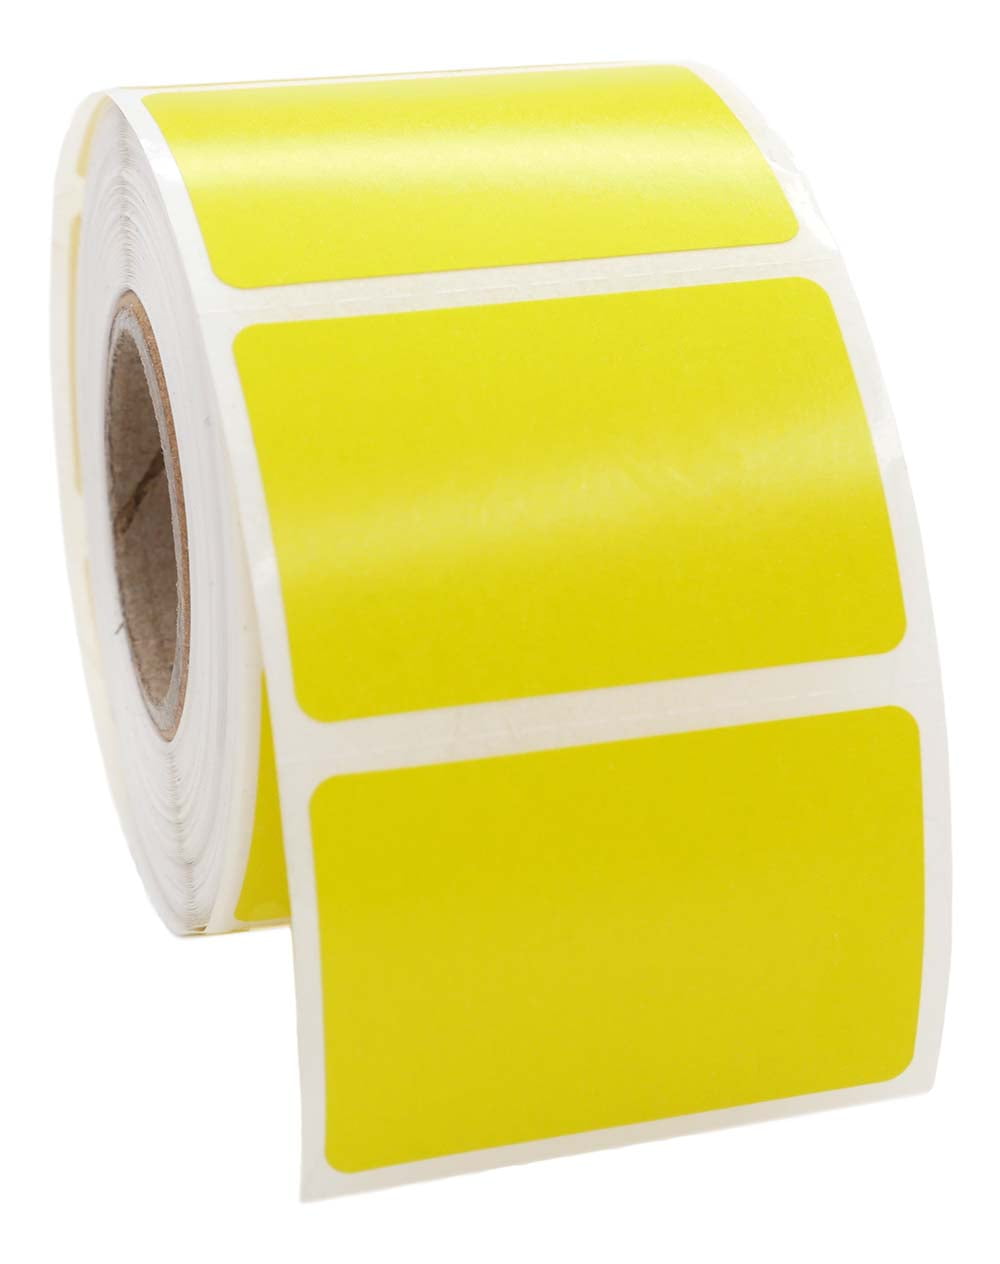 12 Rolls 2.25x1.25 Direct Thermal Barcode Label for Zebra LP2824 TLP2824 LP2844 